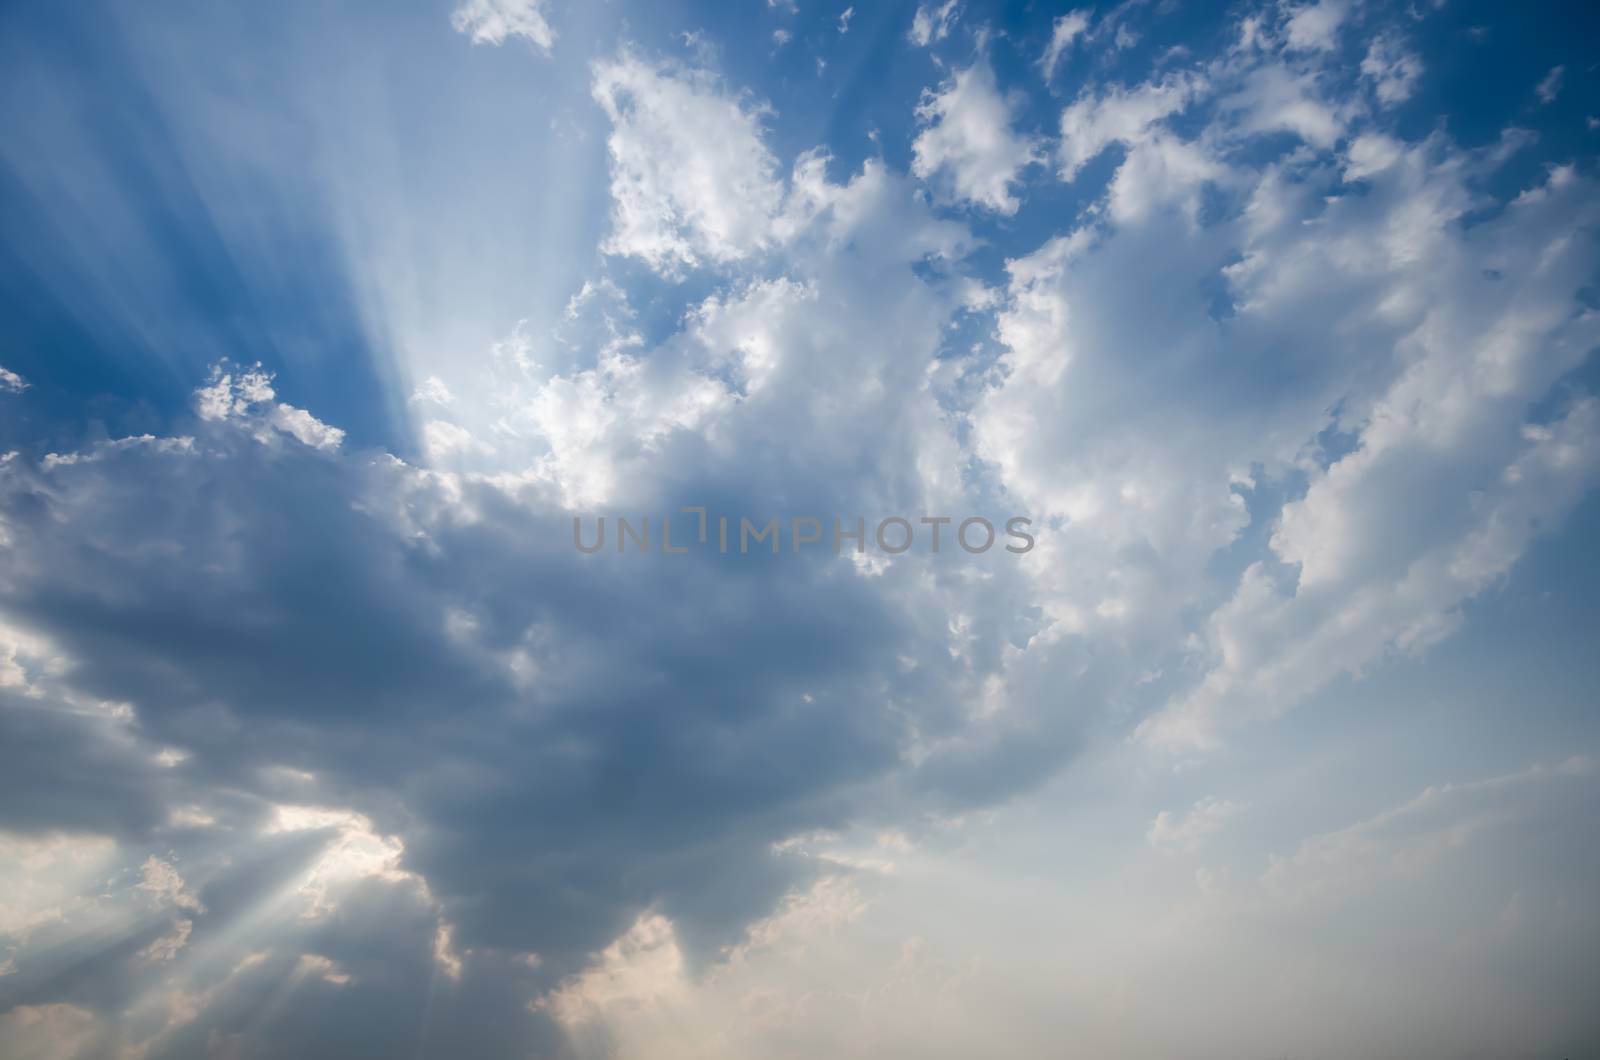 Cloudy with light emerging from the clouds, the light of hope by photobyphotoboy